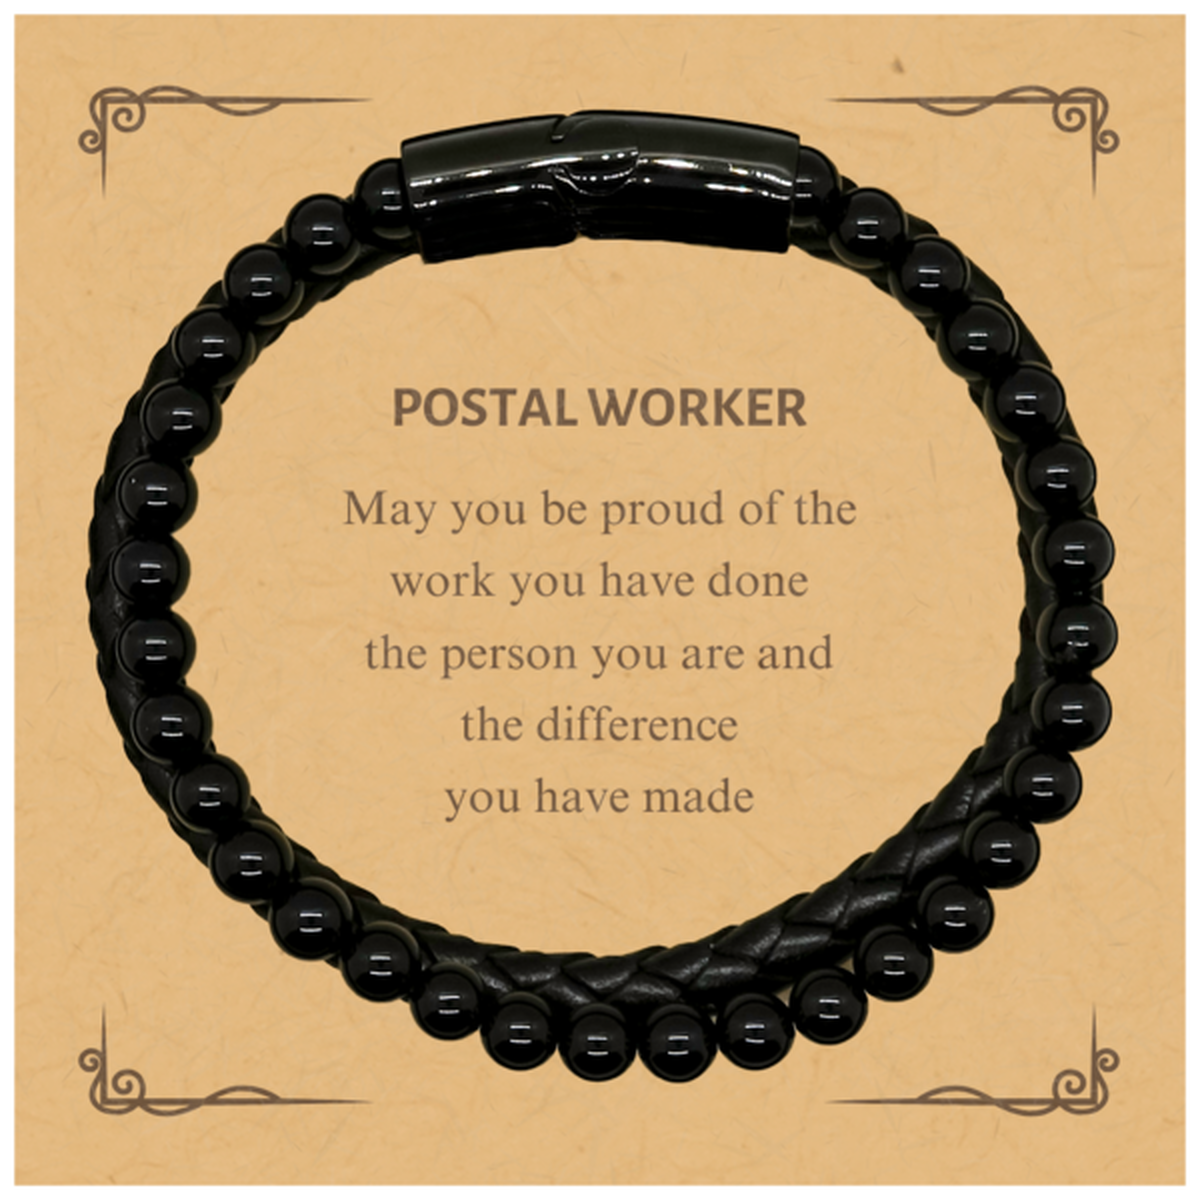 Postal Worker May you be proud of the work you have done, Retirement Postal Worker Stone Leather Bracelets for Colleague Appreciation Gifts Amazing for Postal Worker